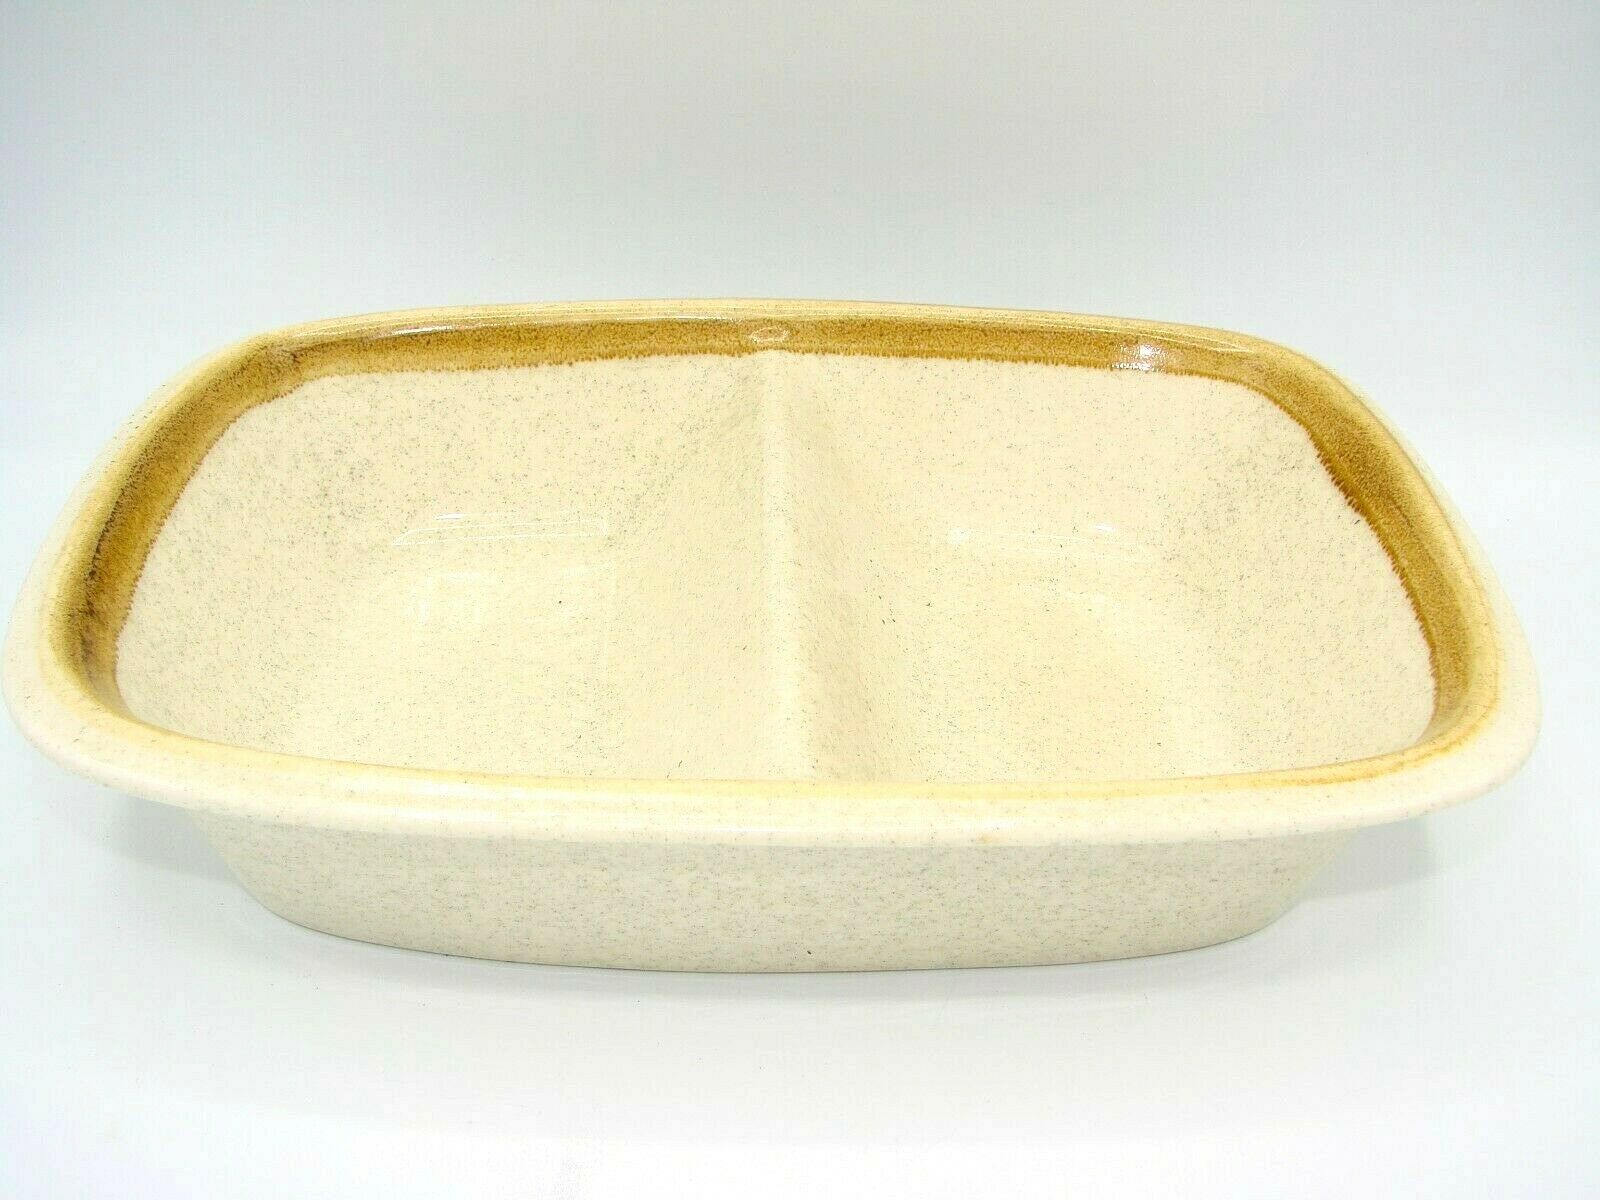 Primary image for EUC Vintage Mikasa Stone Manor Divided Serving Dish Bowl F5800 Made in Japan VTG